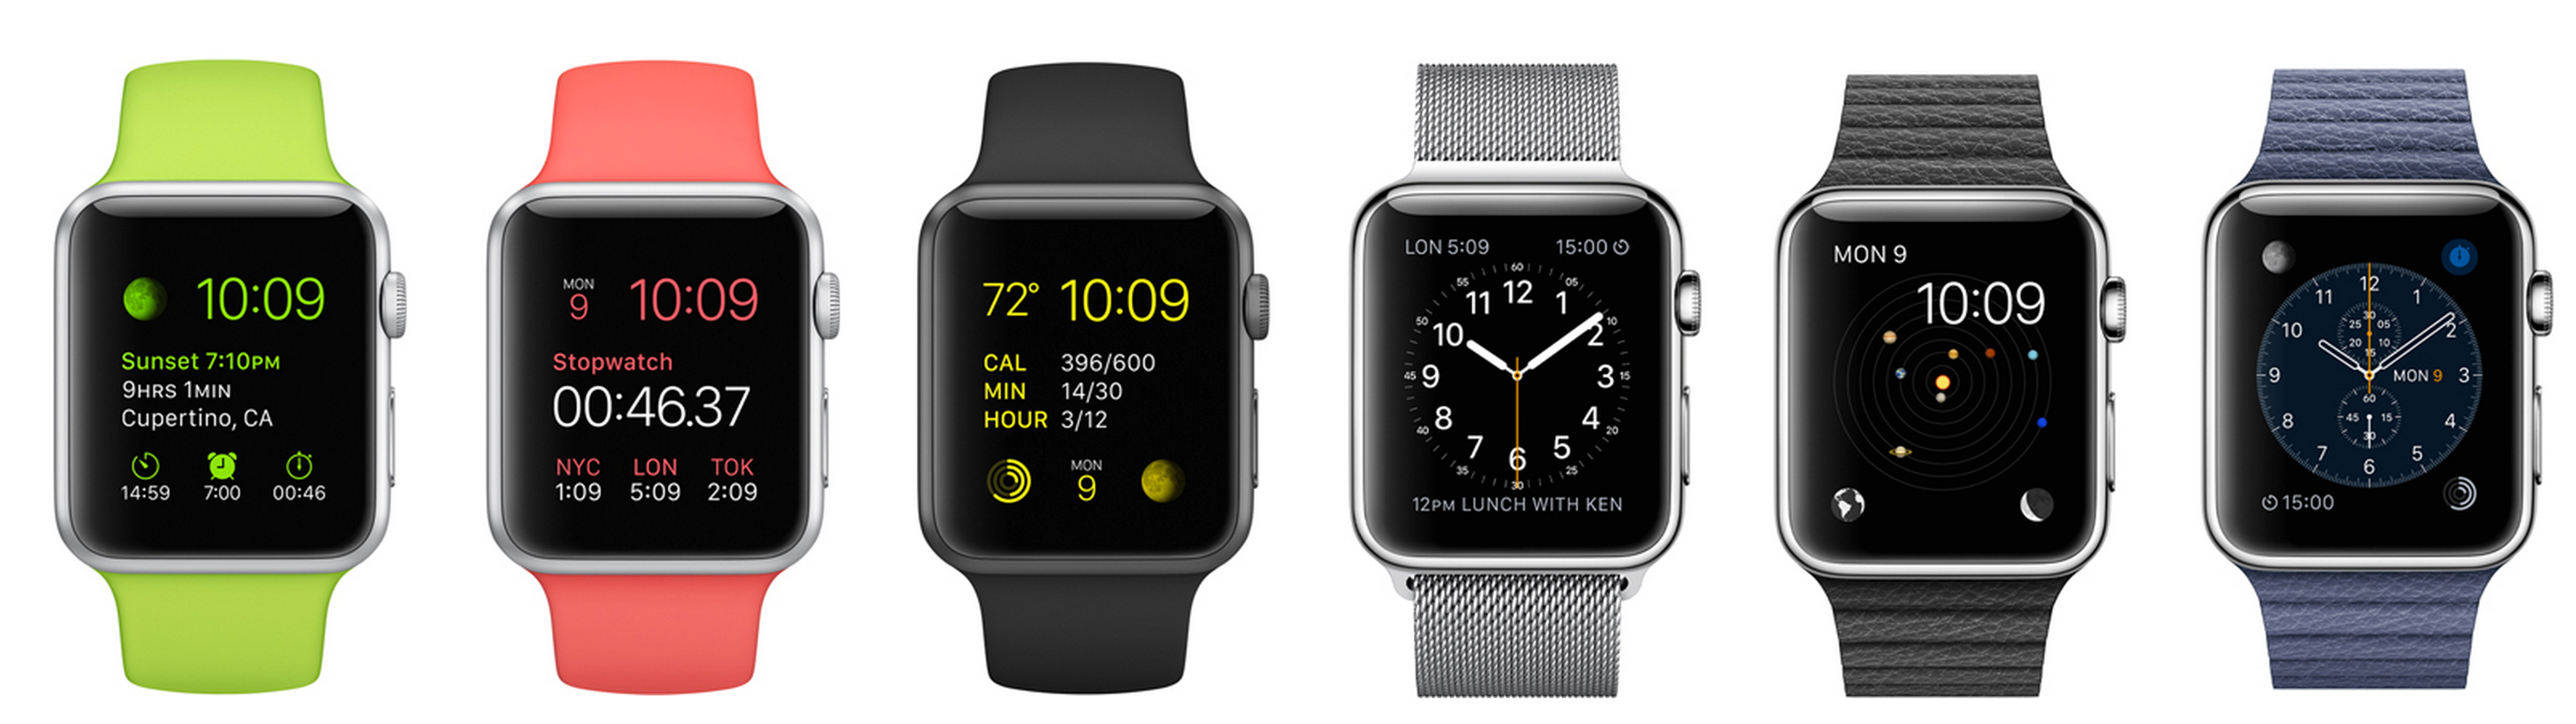 Inconvenient Truths About The Apple Watch | by Mike Rundle | Medium